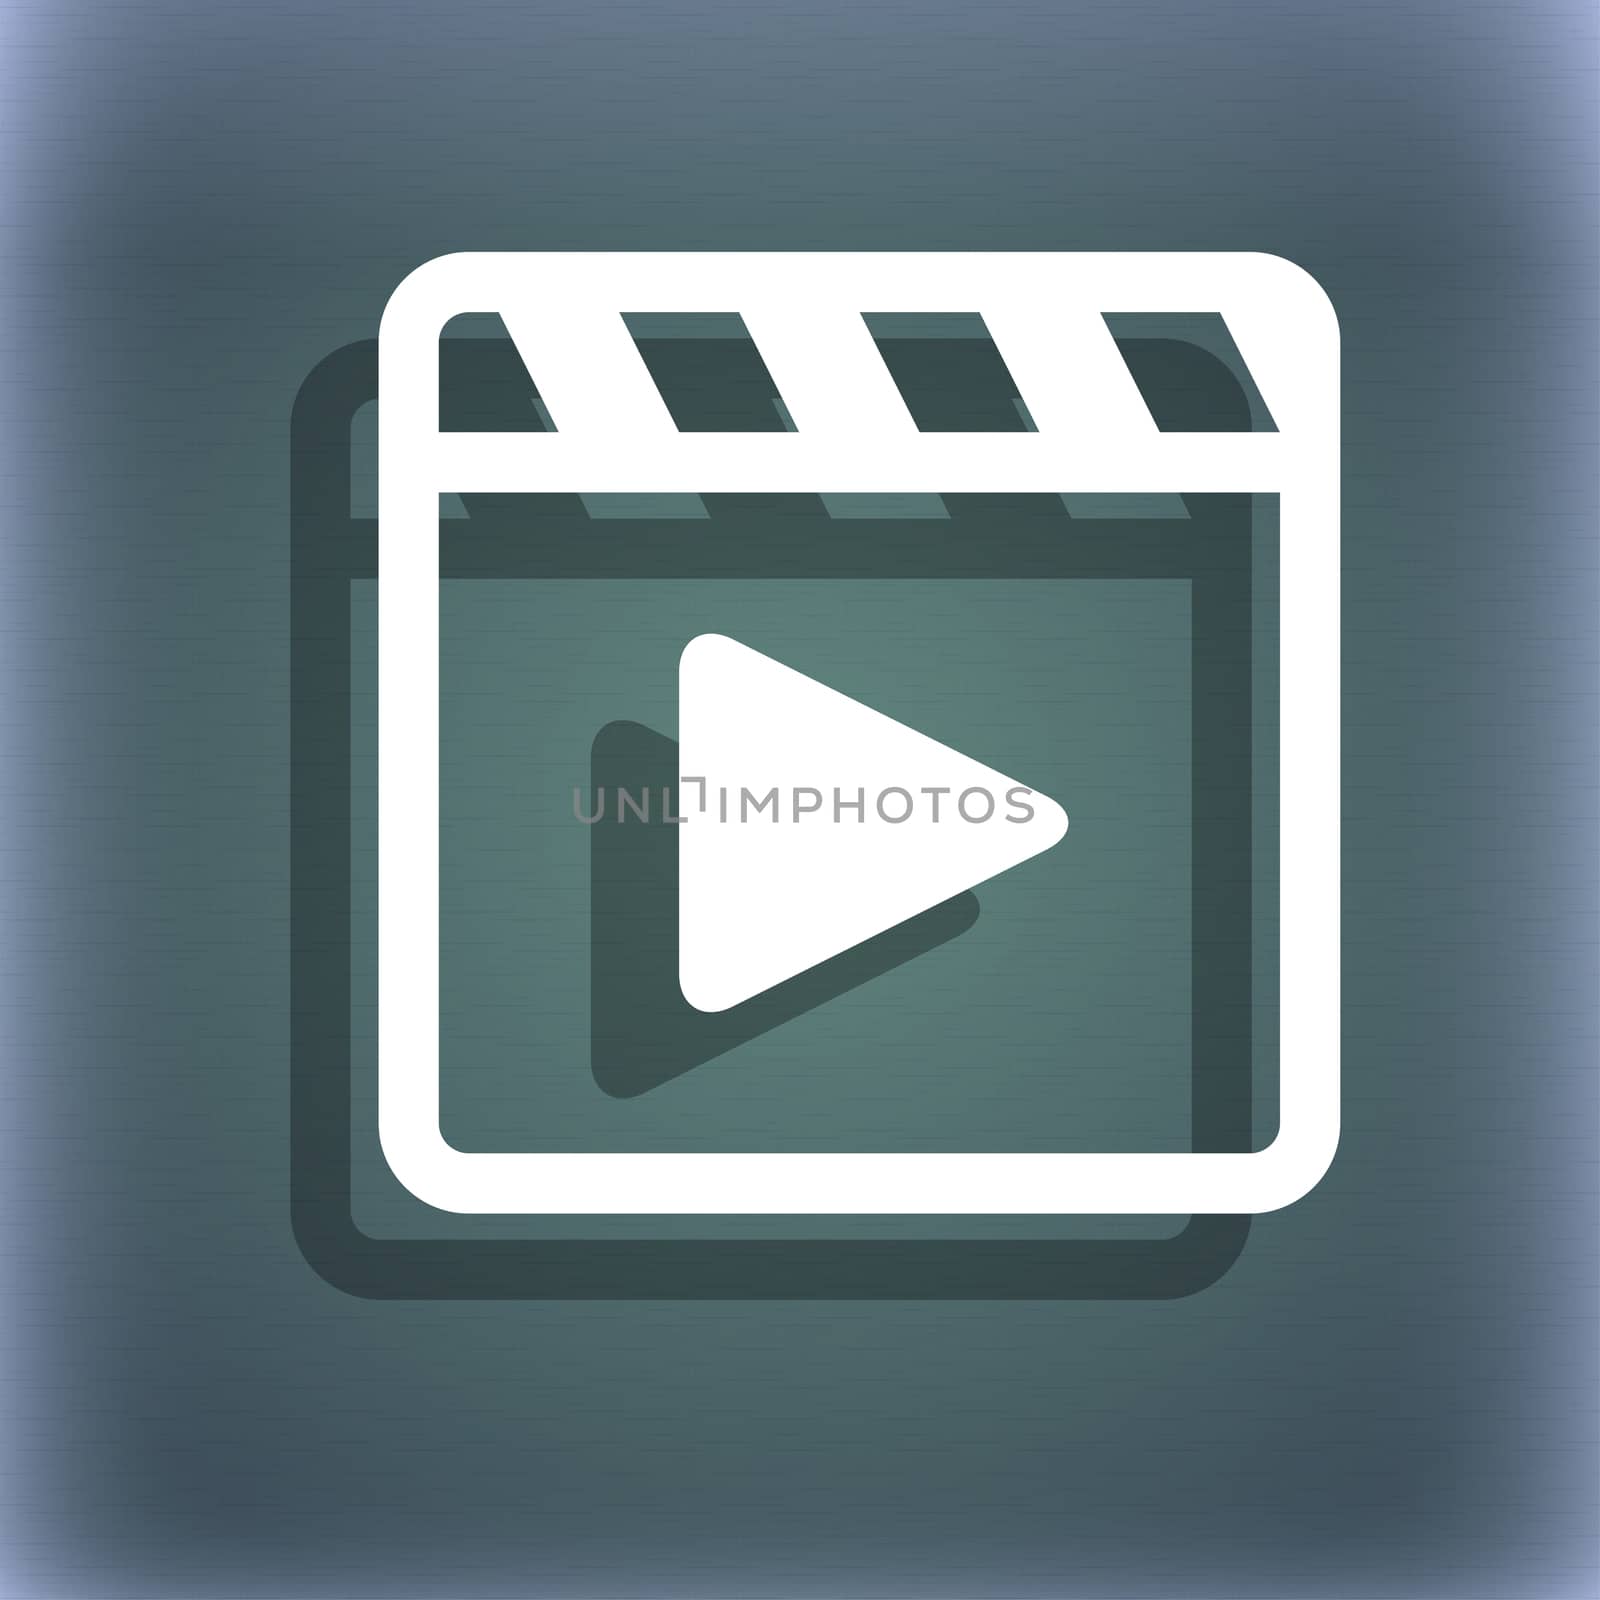 Play video icon symbol on the blue-green abstract background with shadow and space for your text. illustration